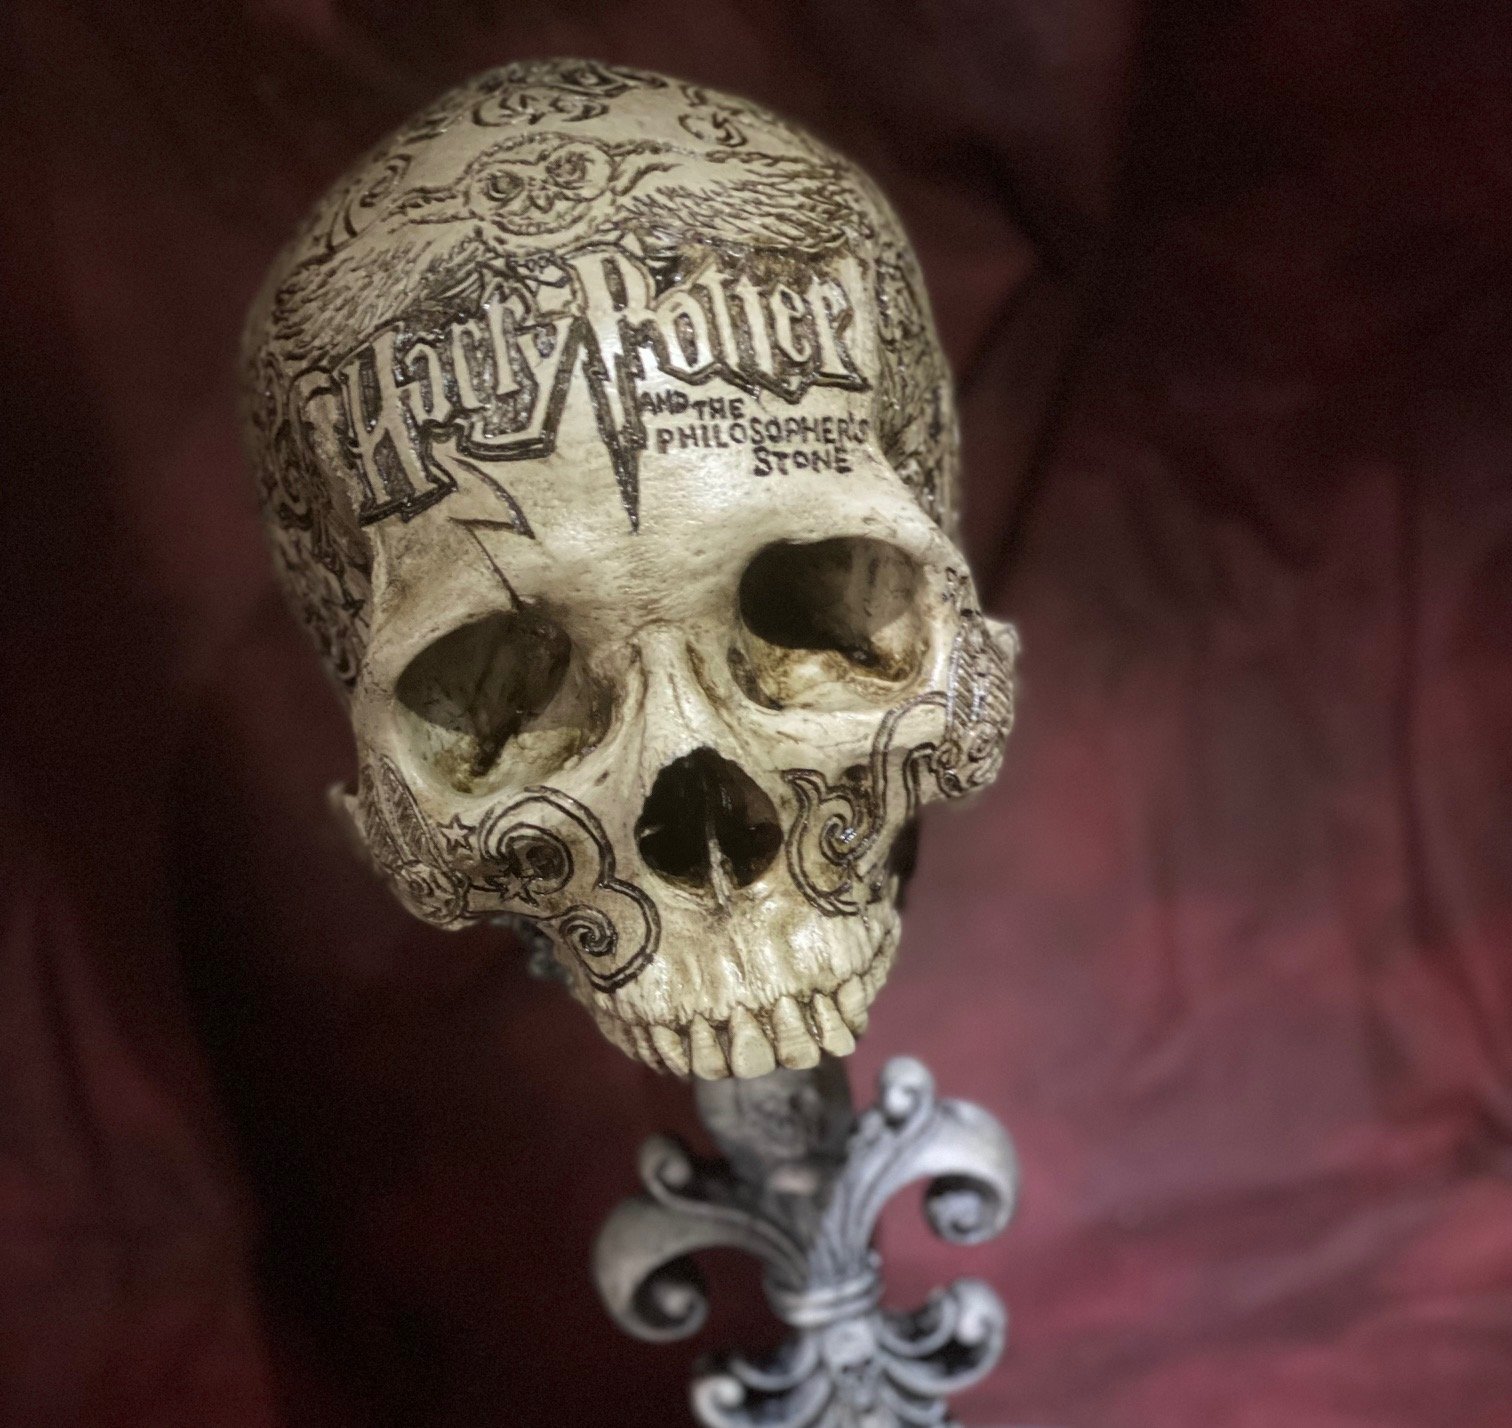 Join Hunt For Harry Potter Human Skull Replica At Wizarding World For Free